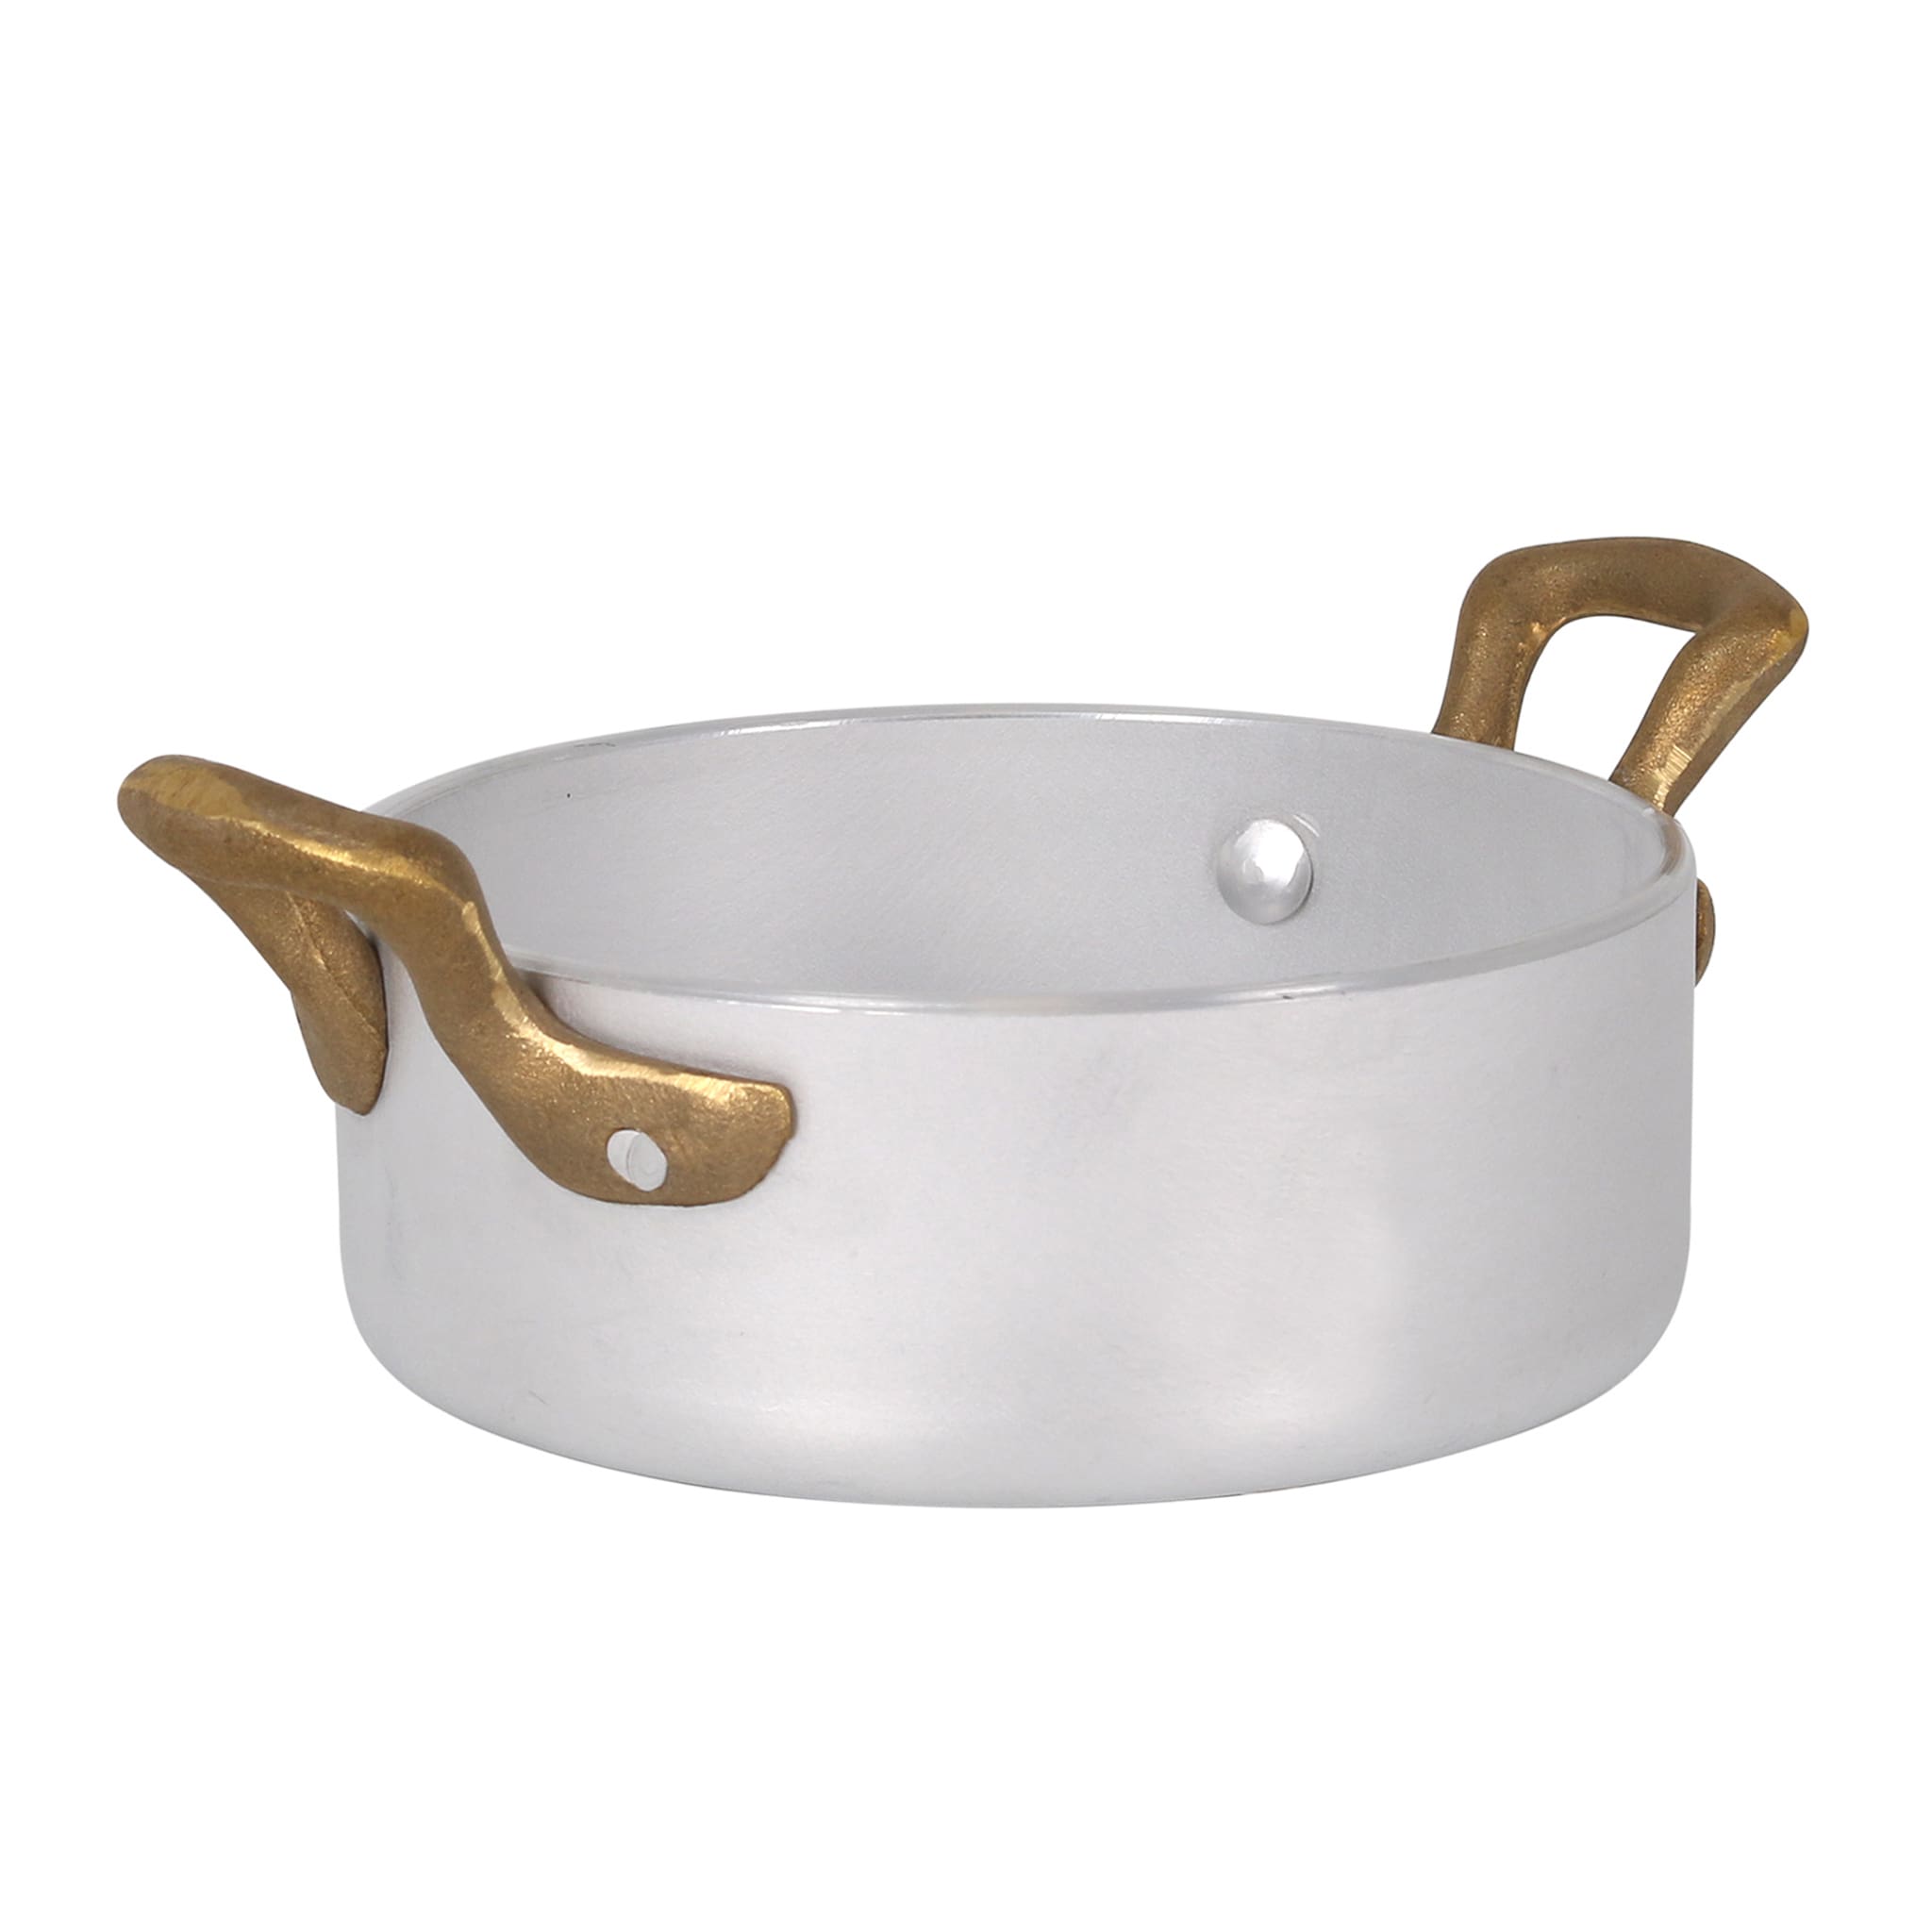 Mini Casserole with Brass Handles for Serving, 12.5cm